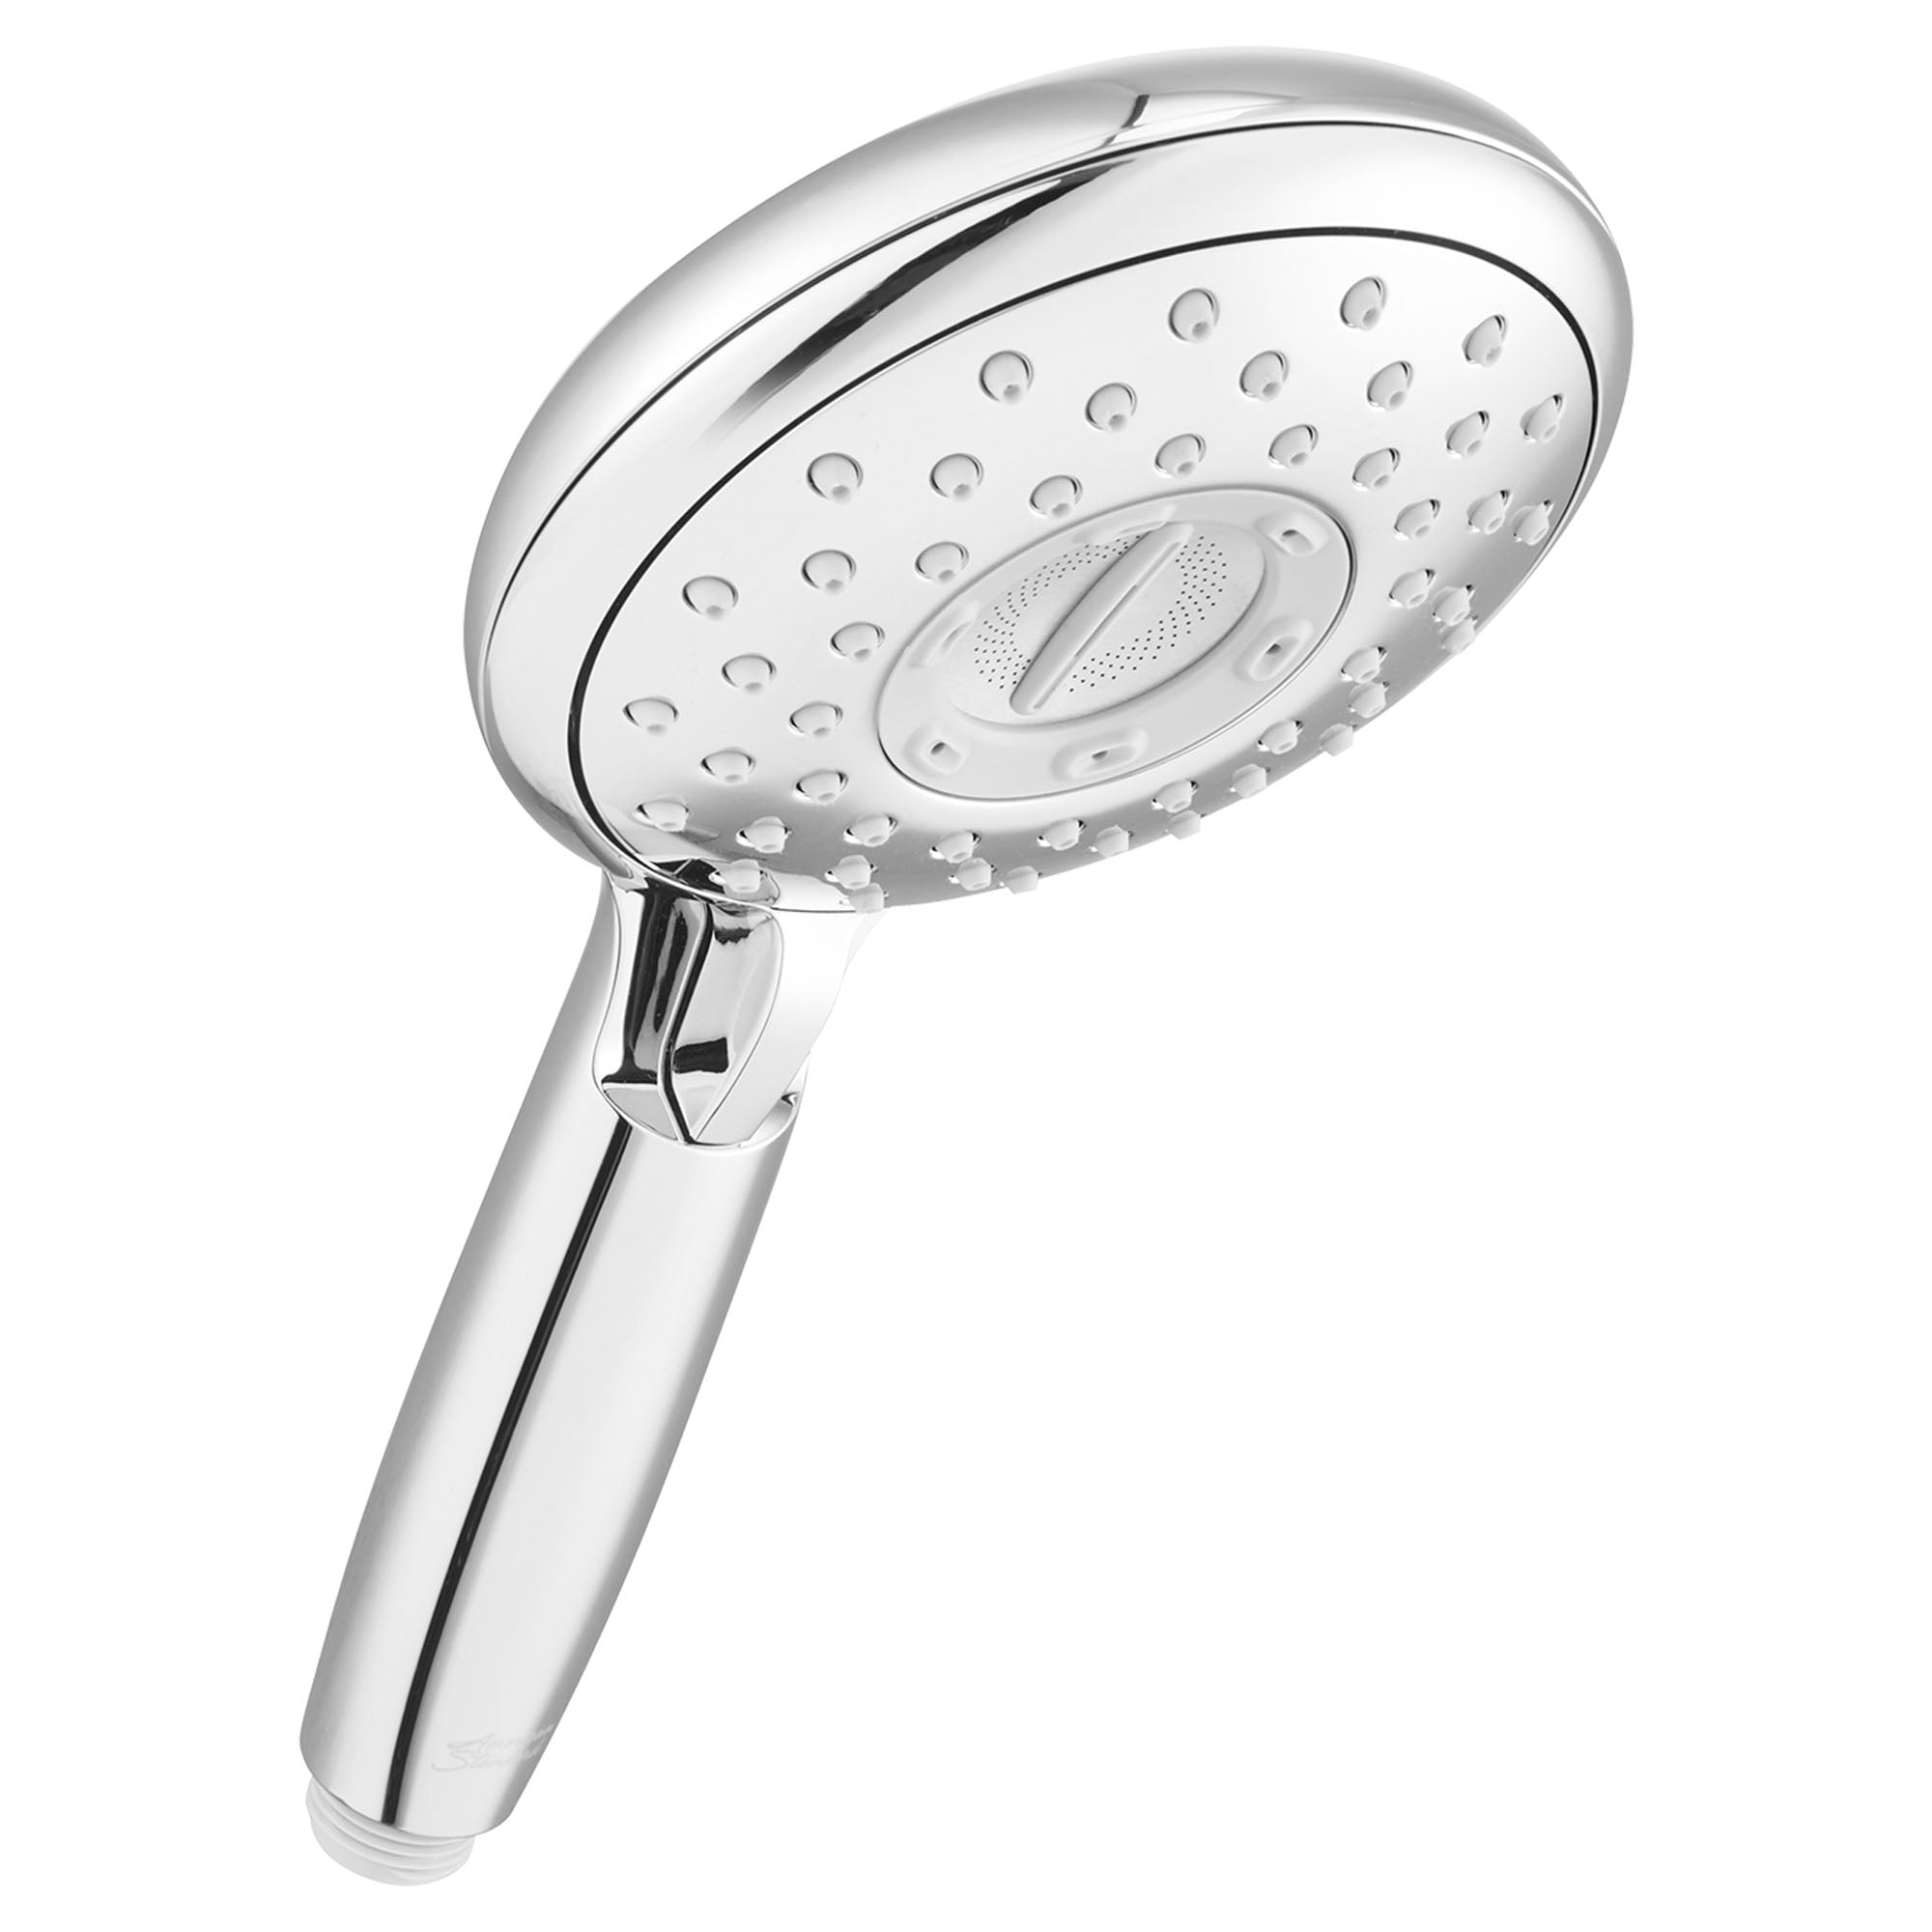 American Standard Spectra+ 4-Function Hand Shower 1.8 GPM in Polished ...